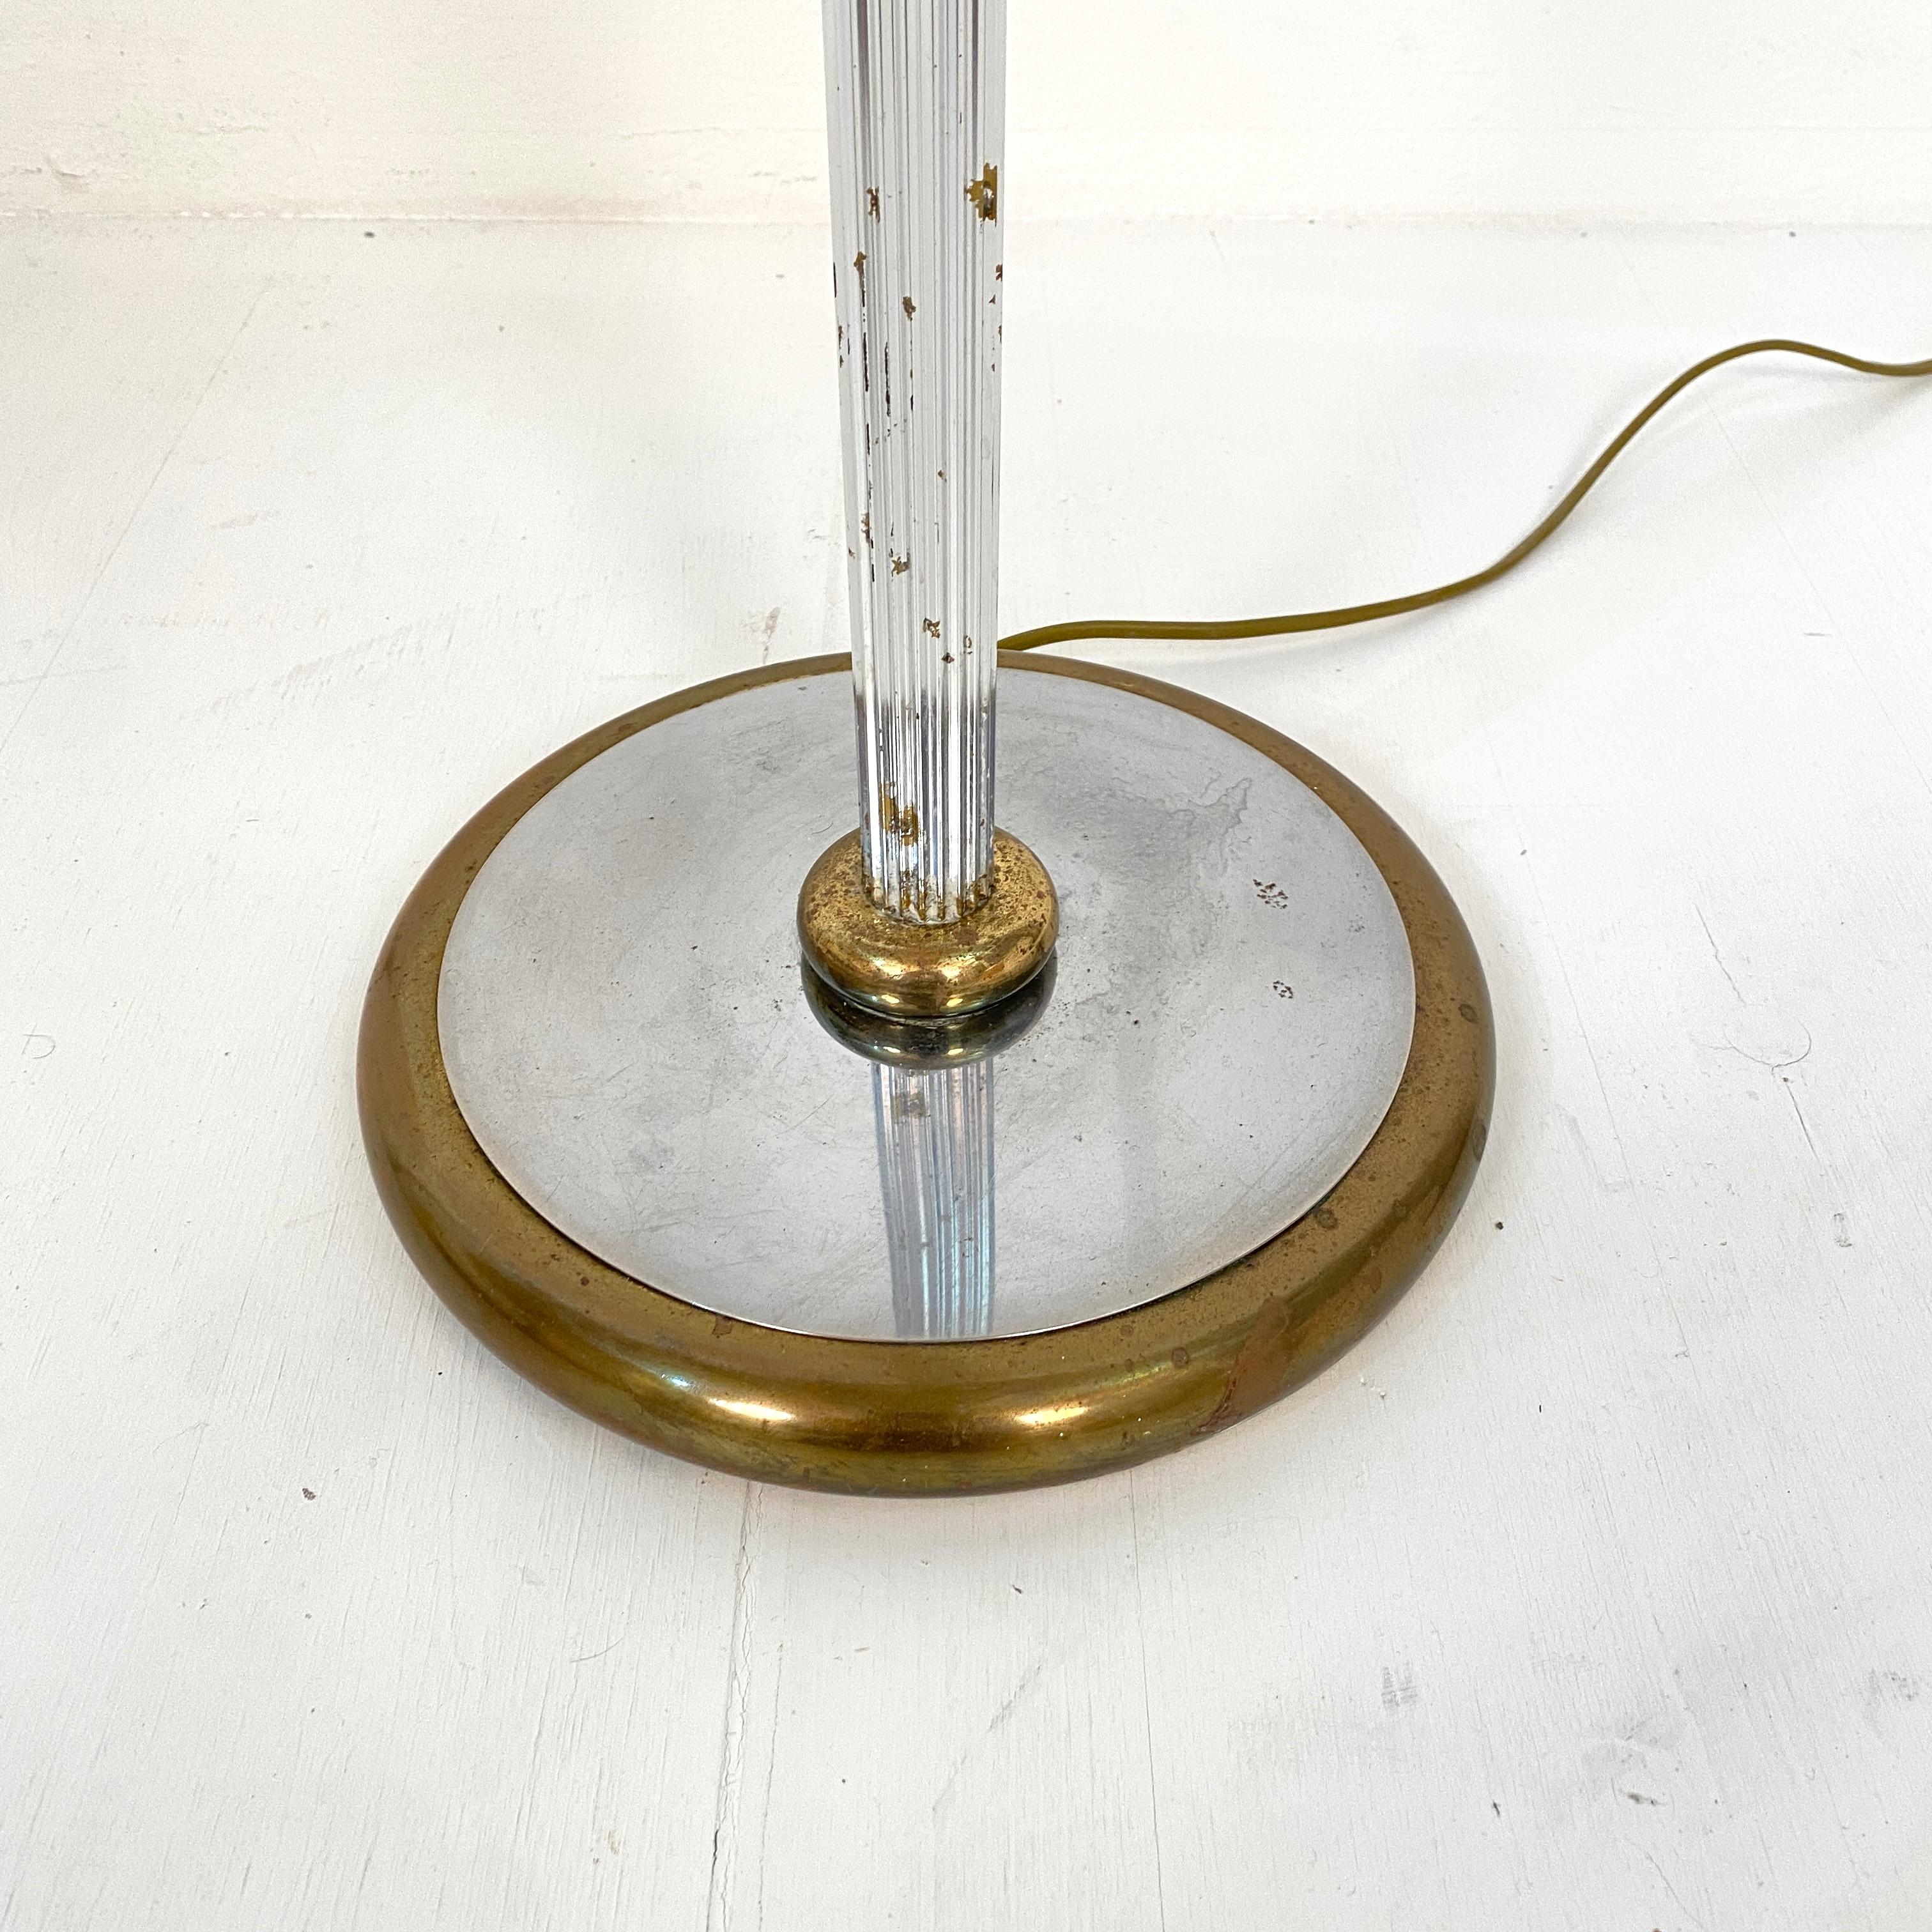 Late 20th Century Midcentury German Floor Lamp by Aro-Leuchte in Chrome and Brass, circa 1970